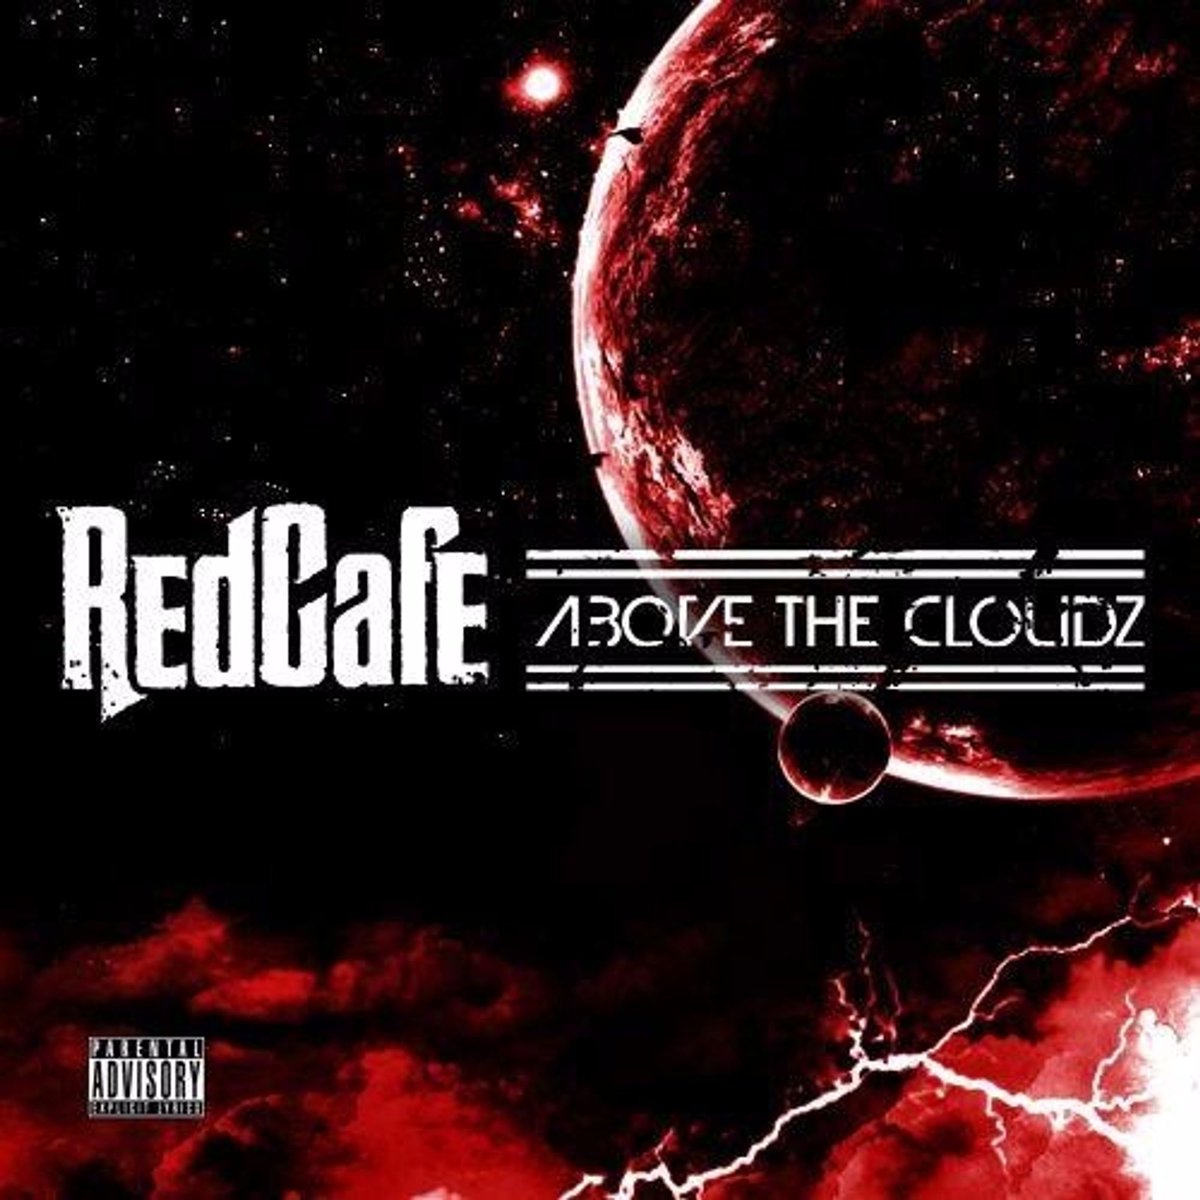 12 Years Ago Today @RedCafe
 Released Above The Cloudz 

#RedCafe #Mixtape #NowPlaying #Listeningto #Rap #Music #HipHop #NewYork #AboveTheCloudz